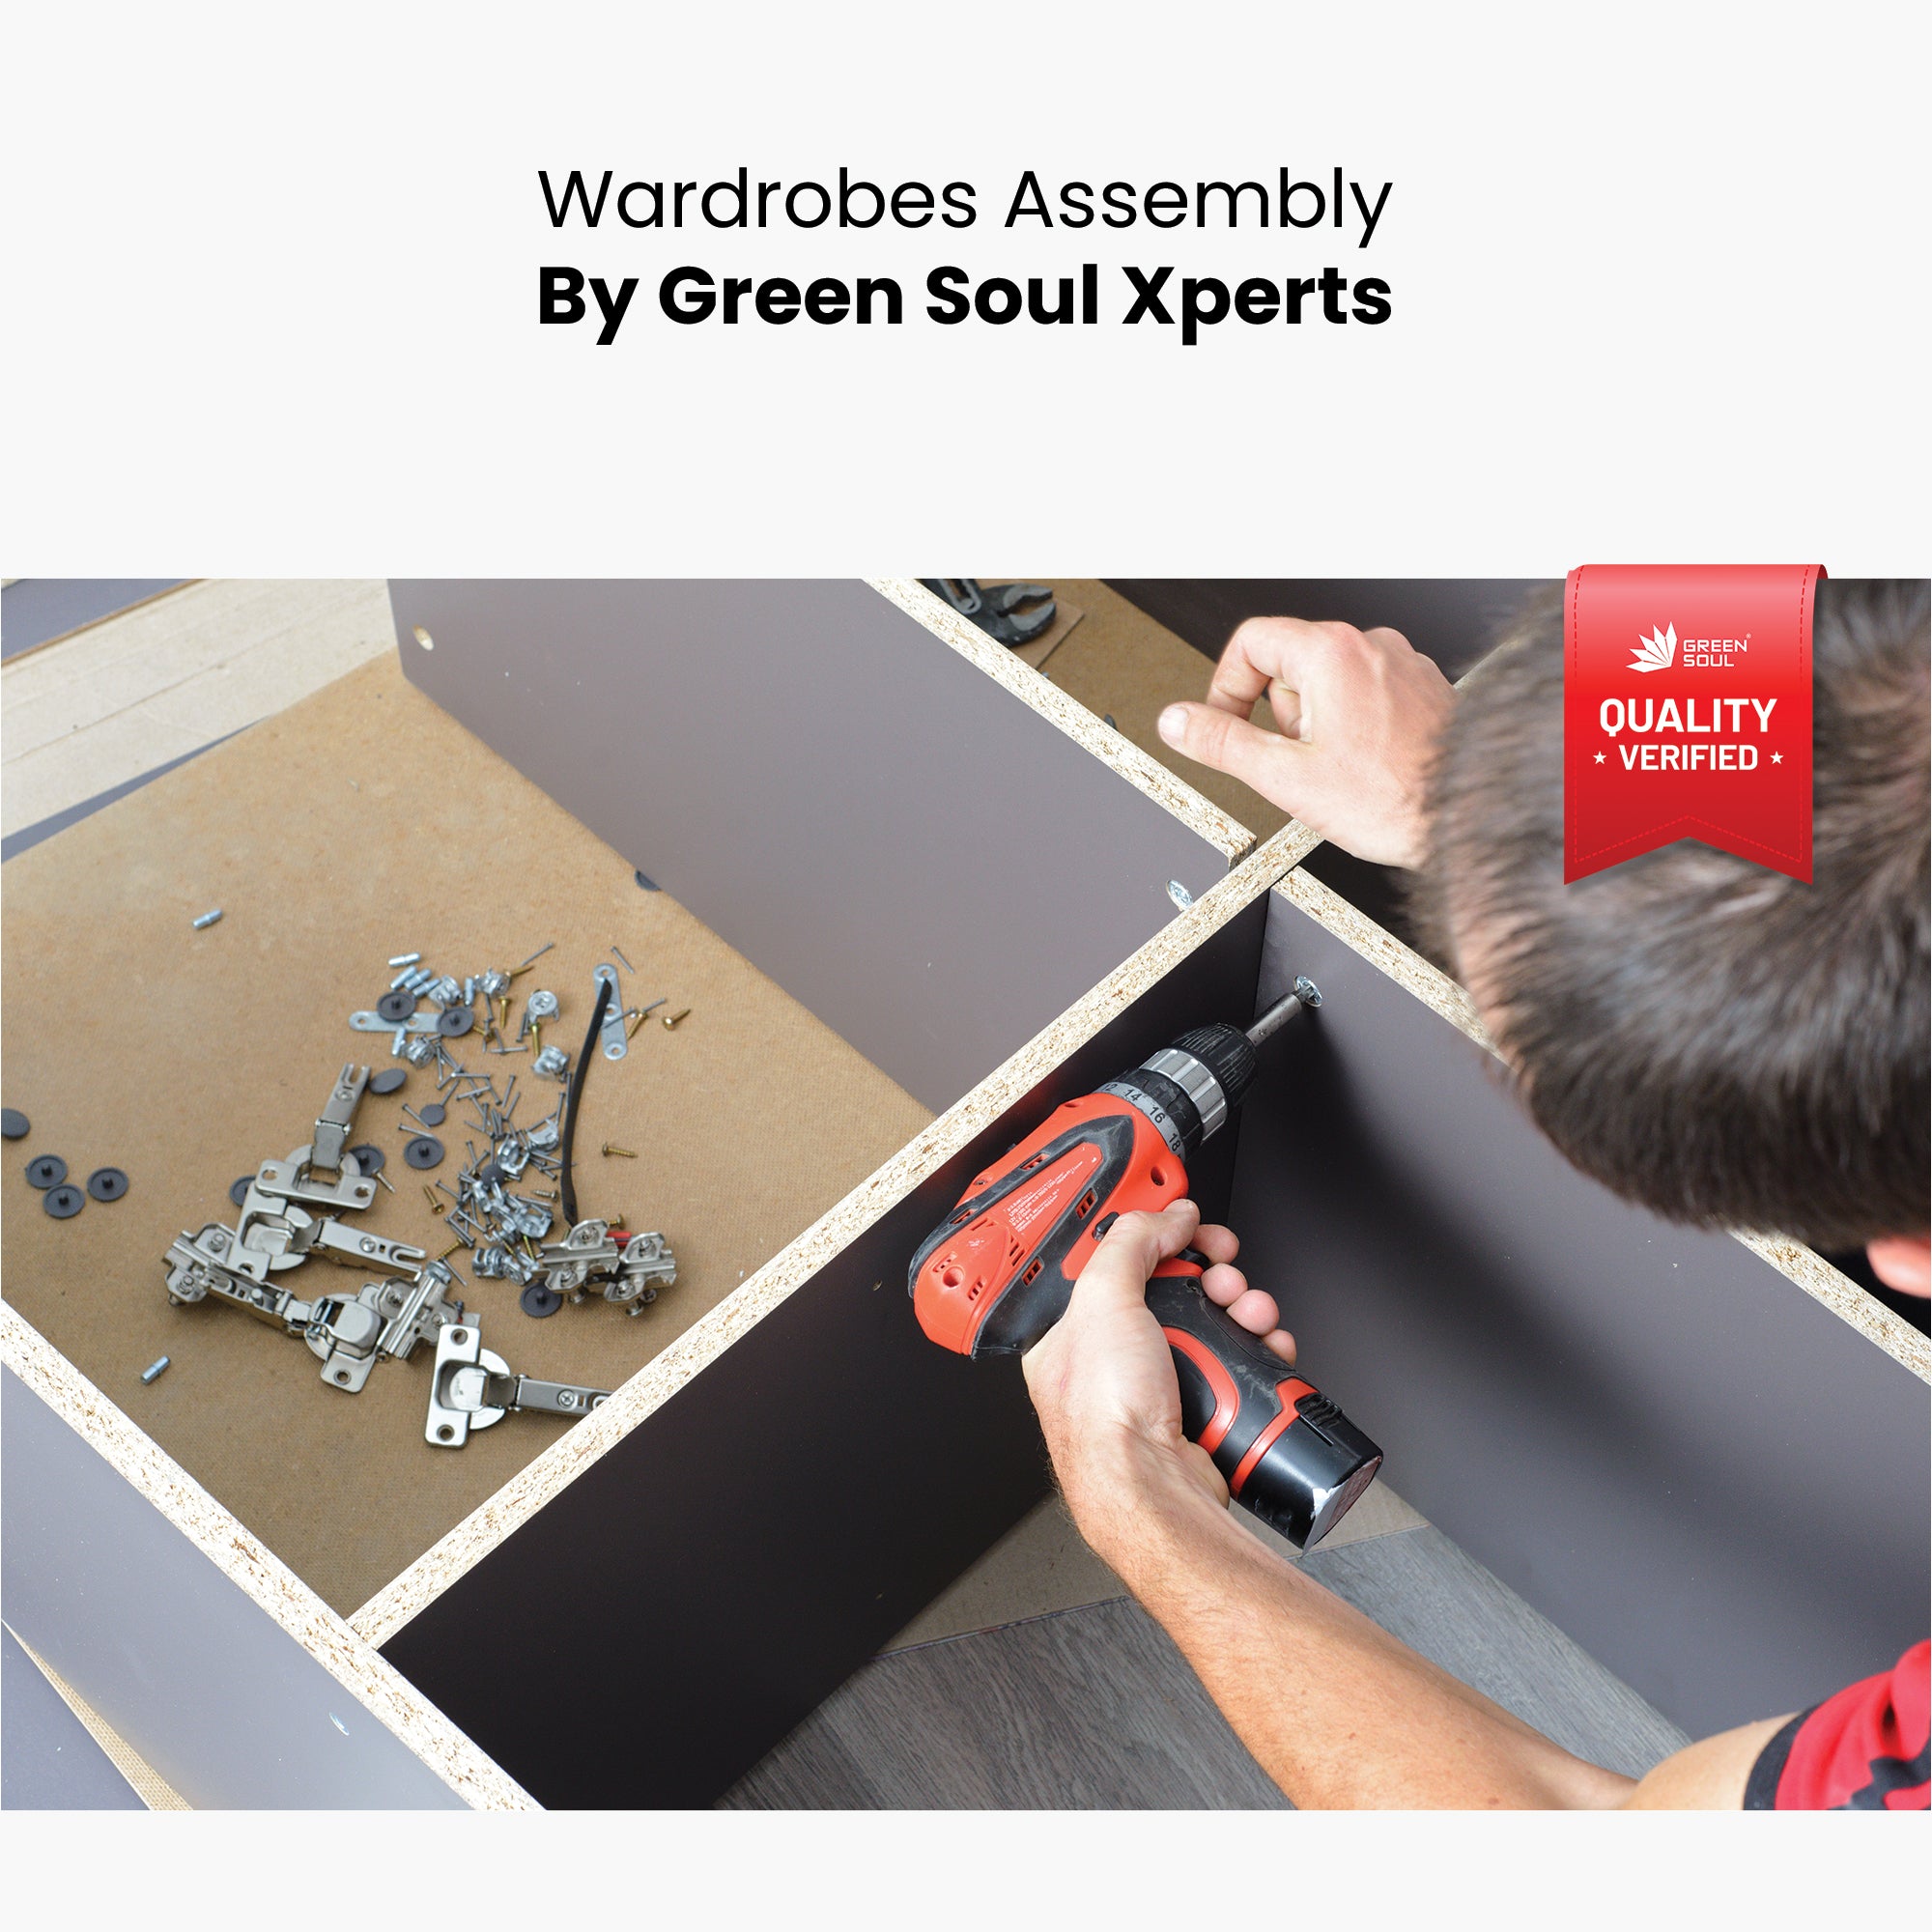 Assembly by Green Soul Xperts